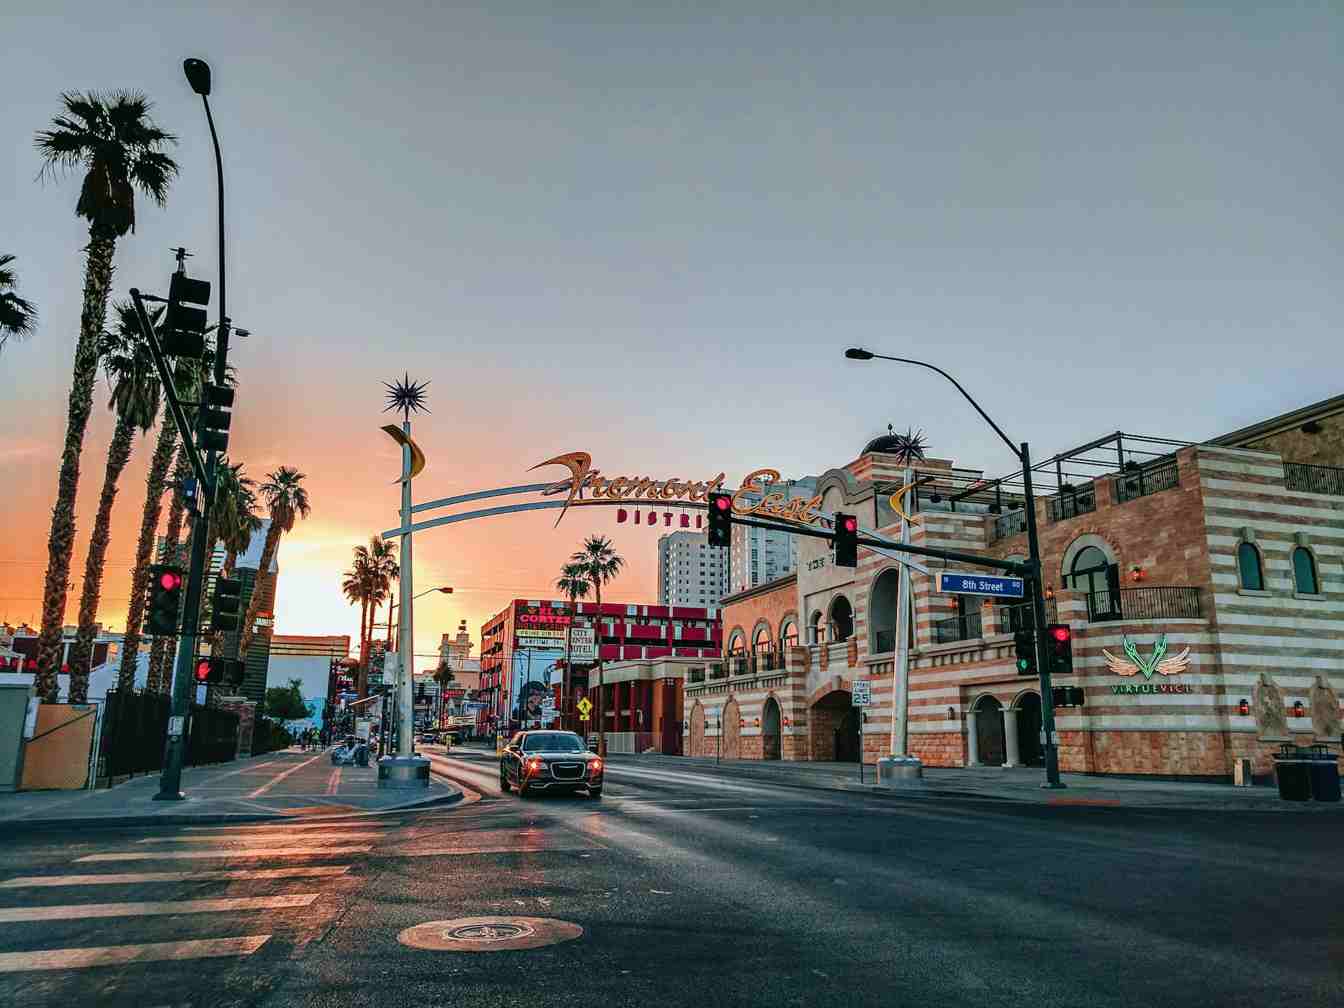 Image of a Las Vegas intersection at sunset.